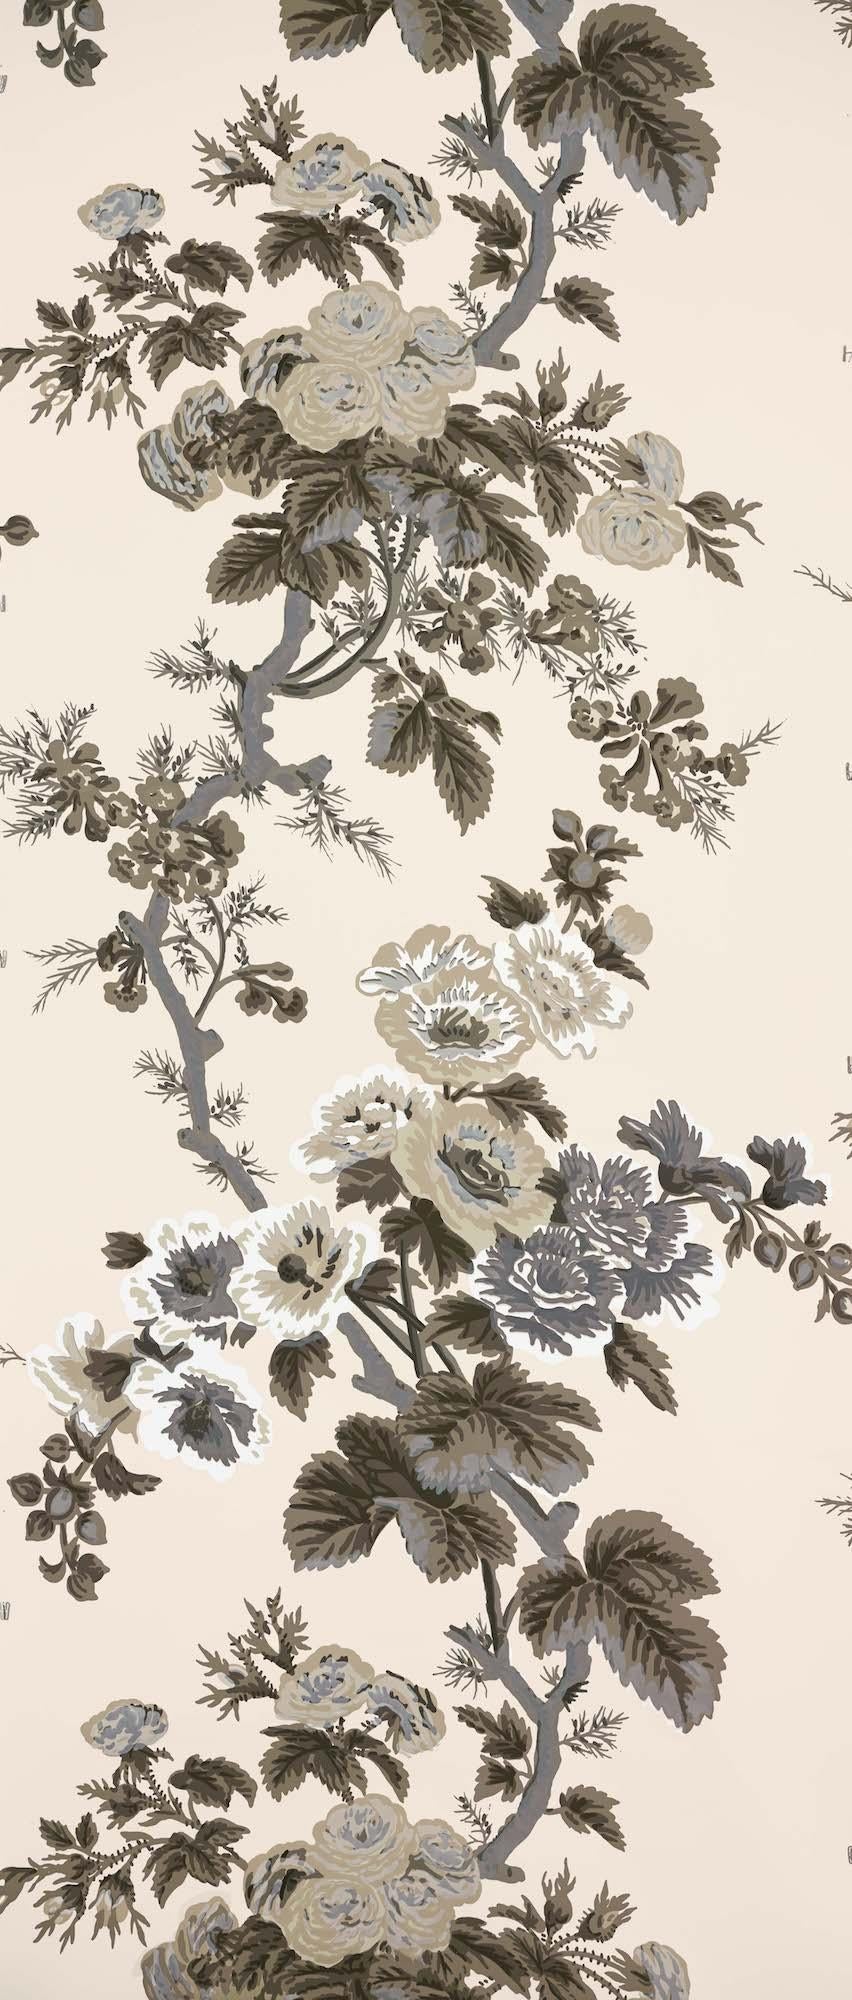 This chintz pattern was famously used by designer Albert Hadley for his client Nancy Pyne. It's one of our most sought-after designs. 

Since Schumacher was founded in 1889, our family-owned company has been synonymous with style, taste, and